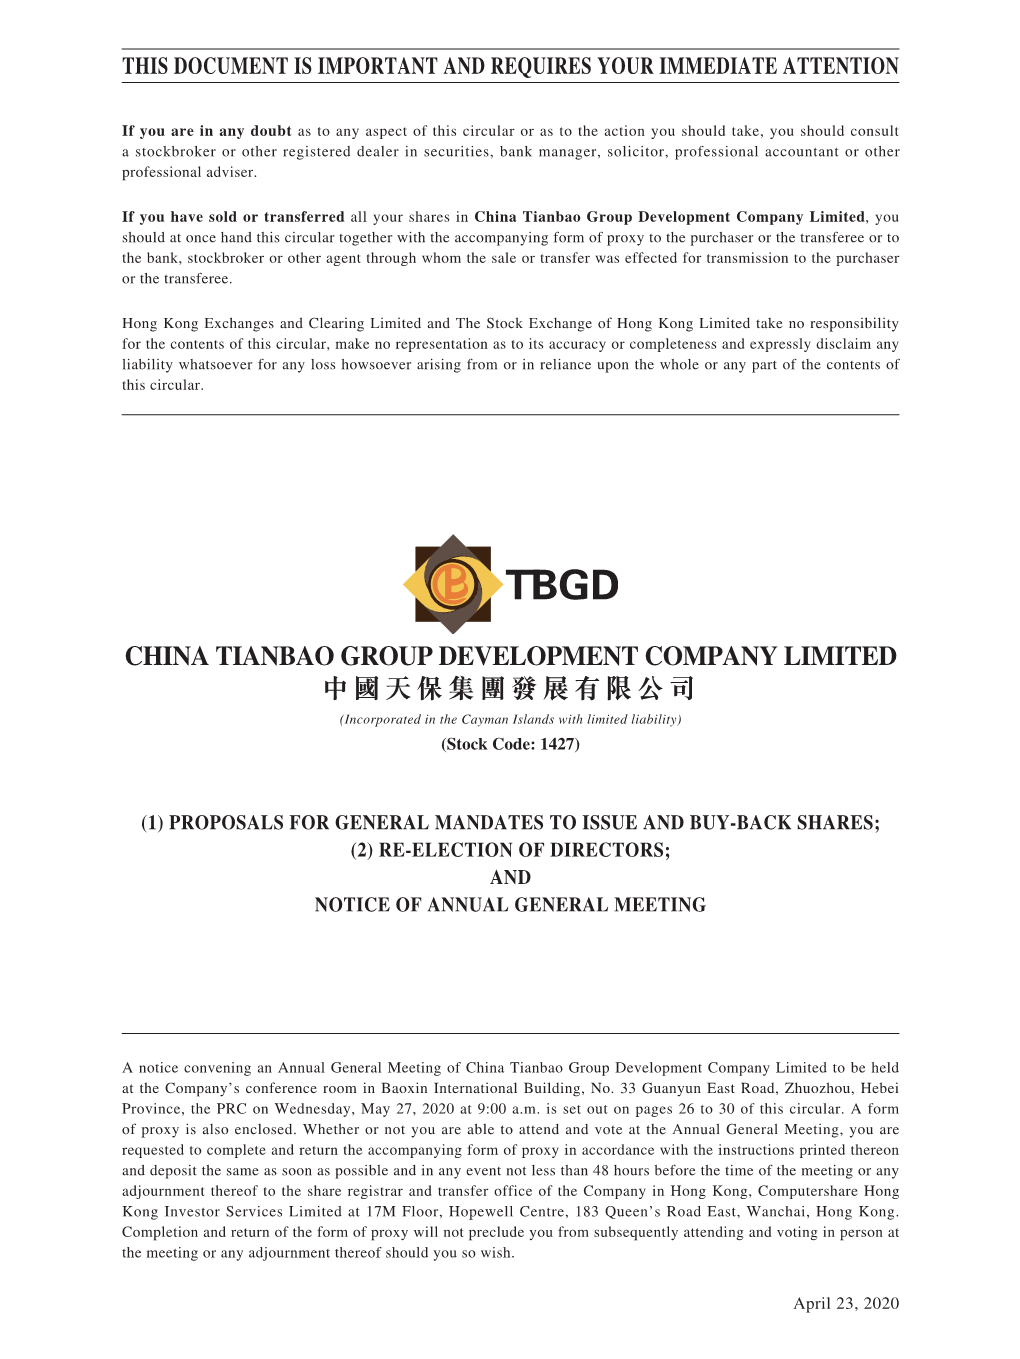 CHINA TIANBAO GROUP DEVELOPMENT COMPANY LIMITED 中國天保集團發展有限公司 (Incorporated in the Cayman Islands with Limited Liability) (Stock Code: 1427)